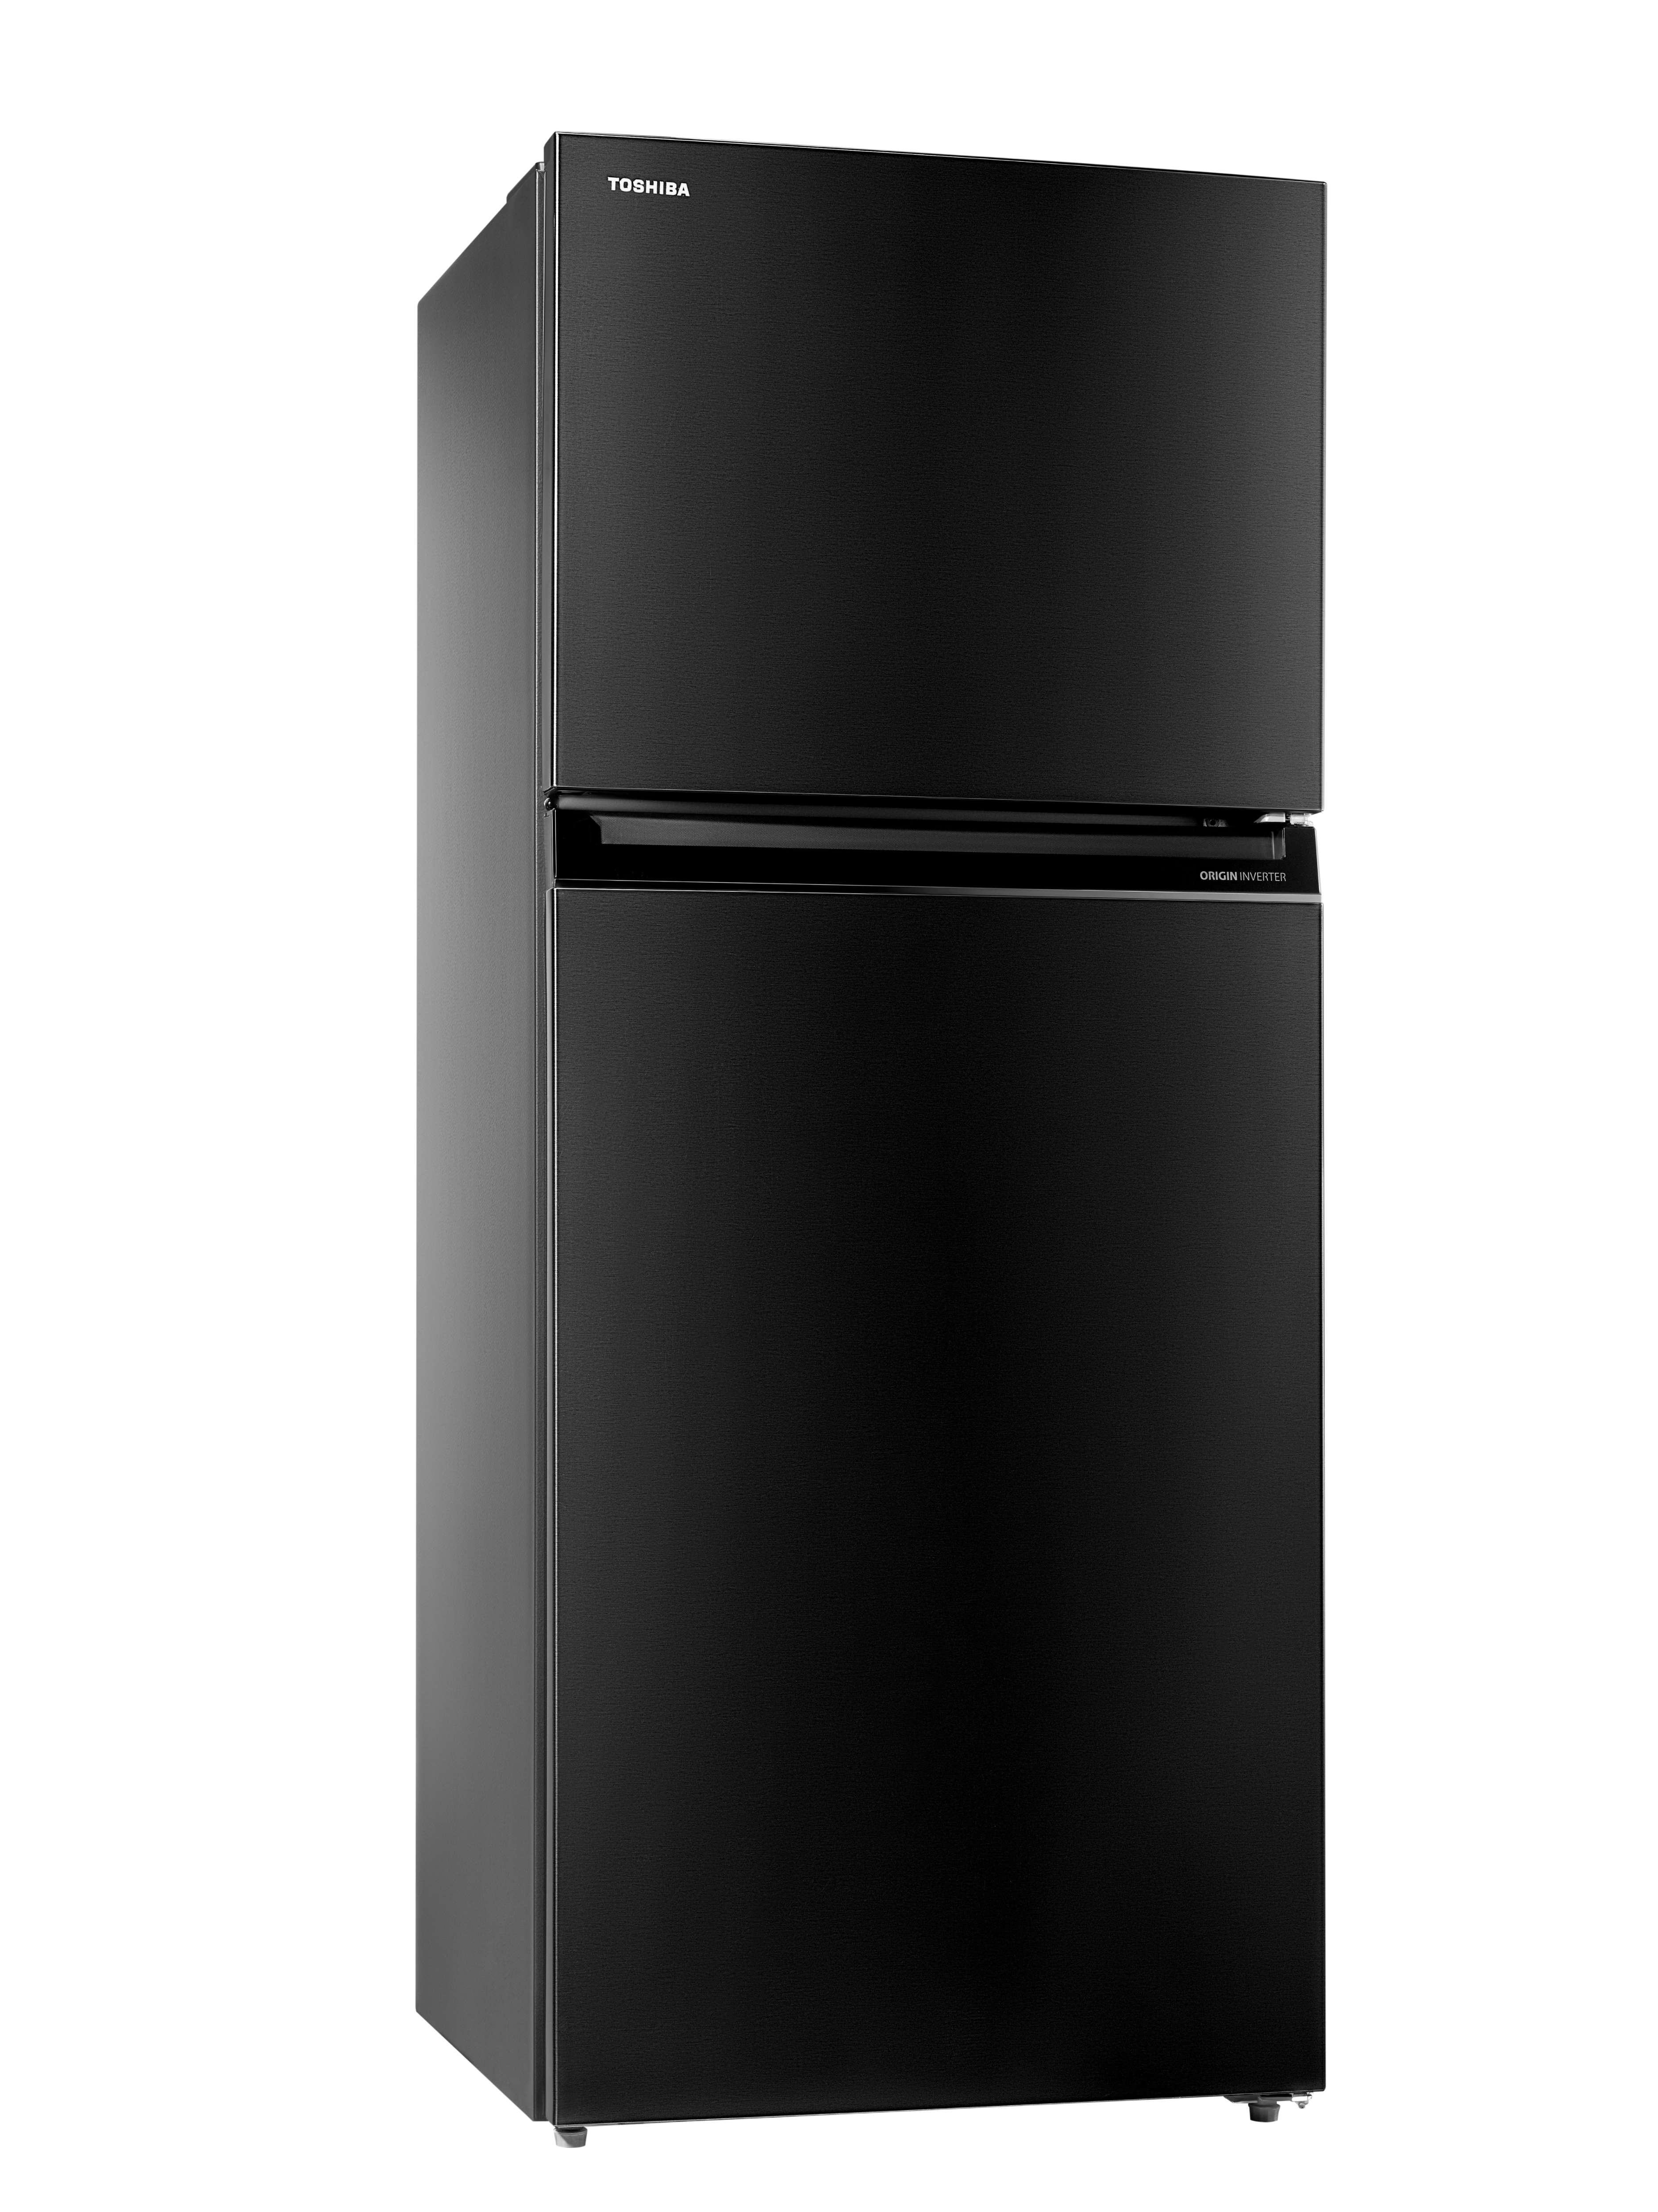 411 L, Real Inverter Refrigerator with AirFall Cooling Technology.